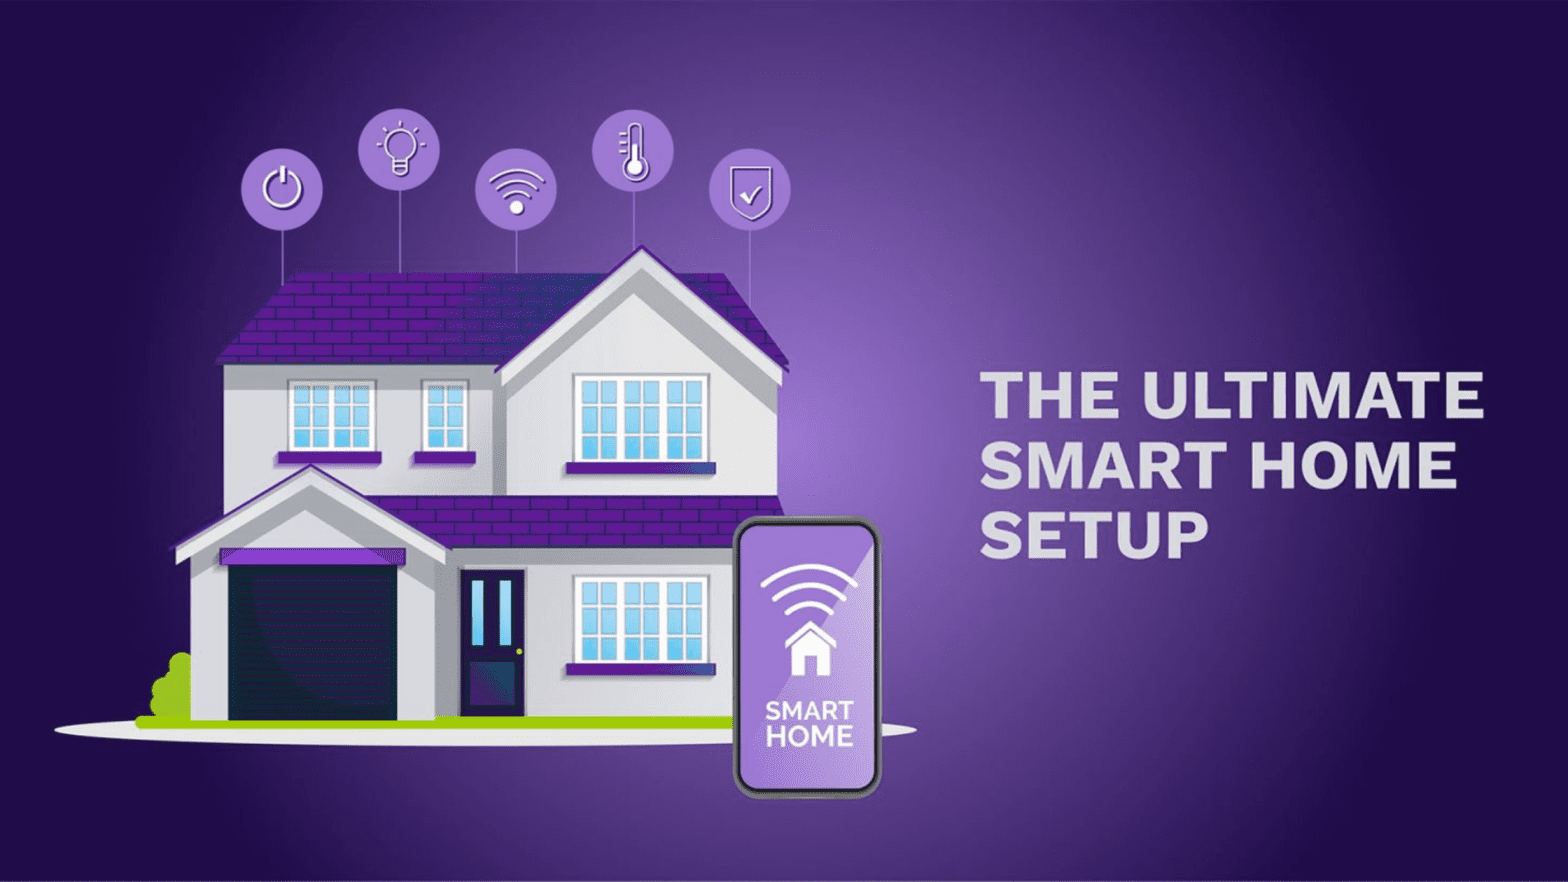 Koble-5-smart-home-products-for-the-ultimate-home-setup